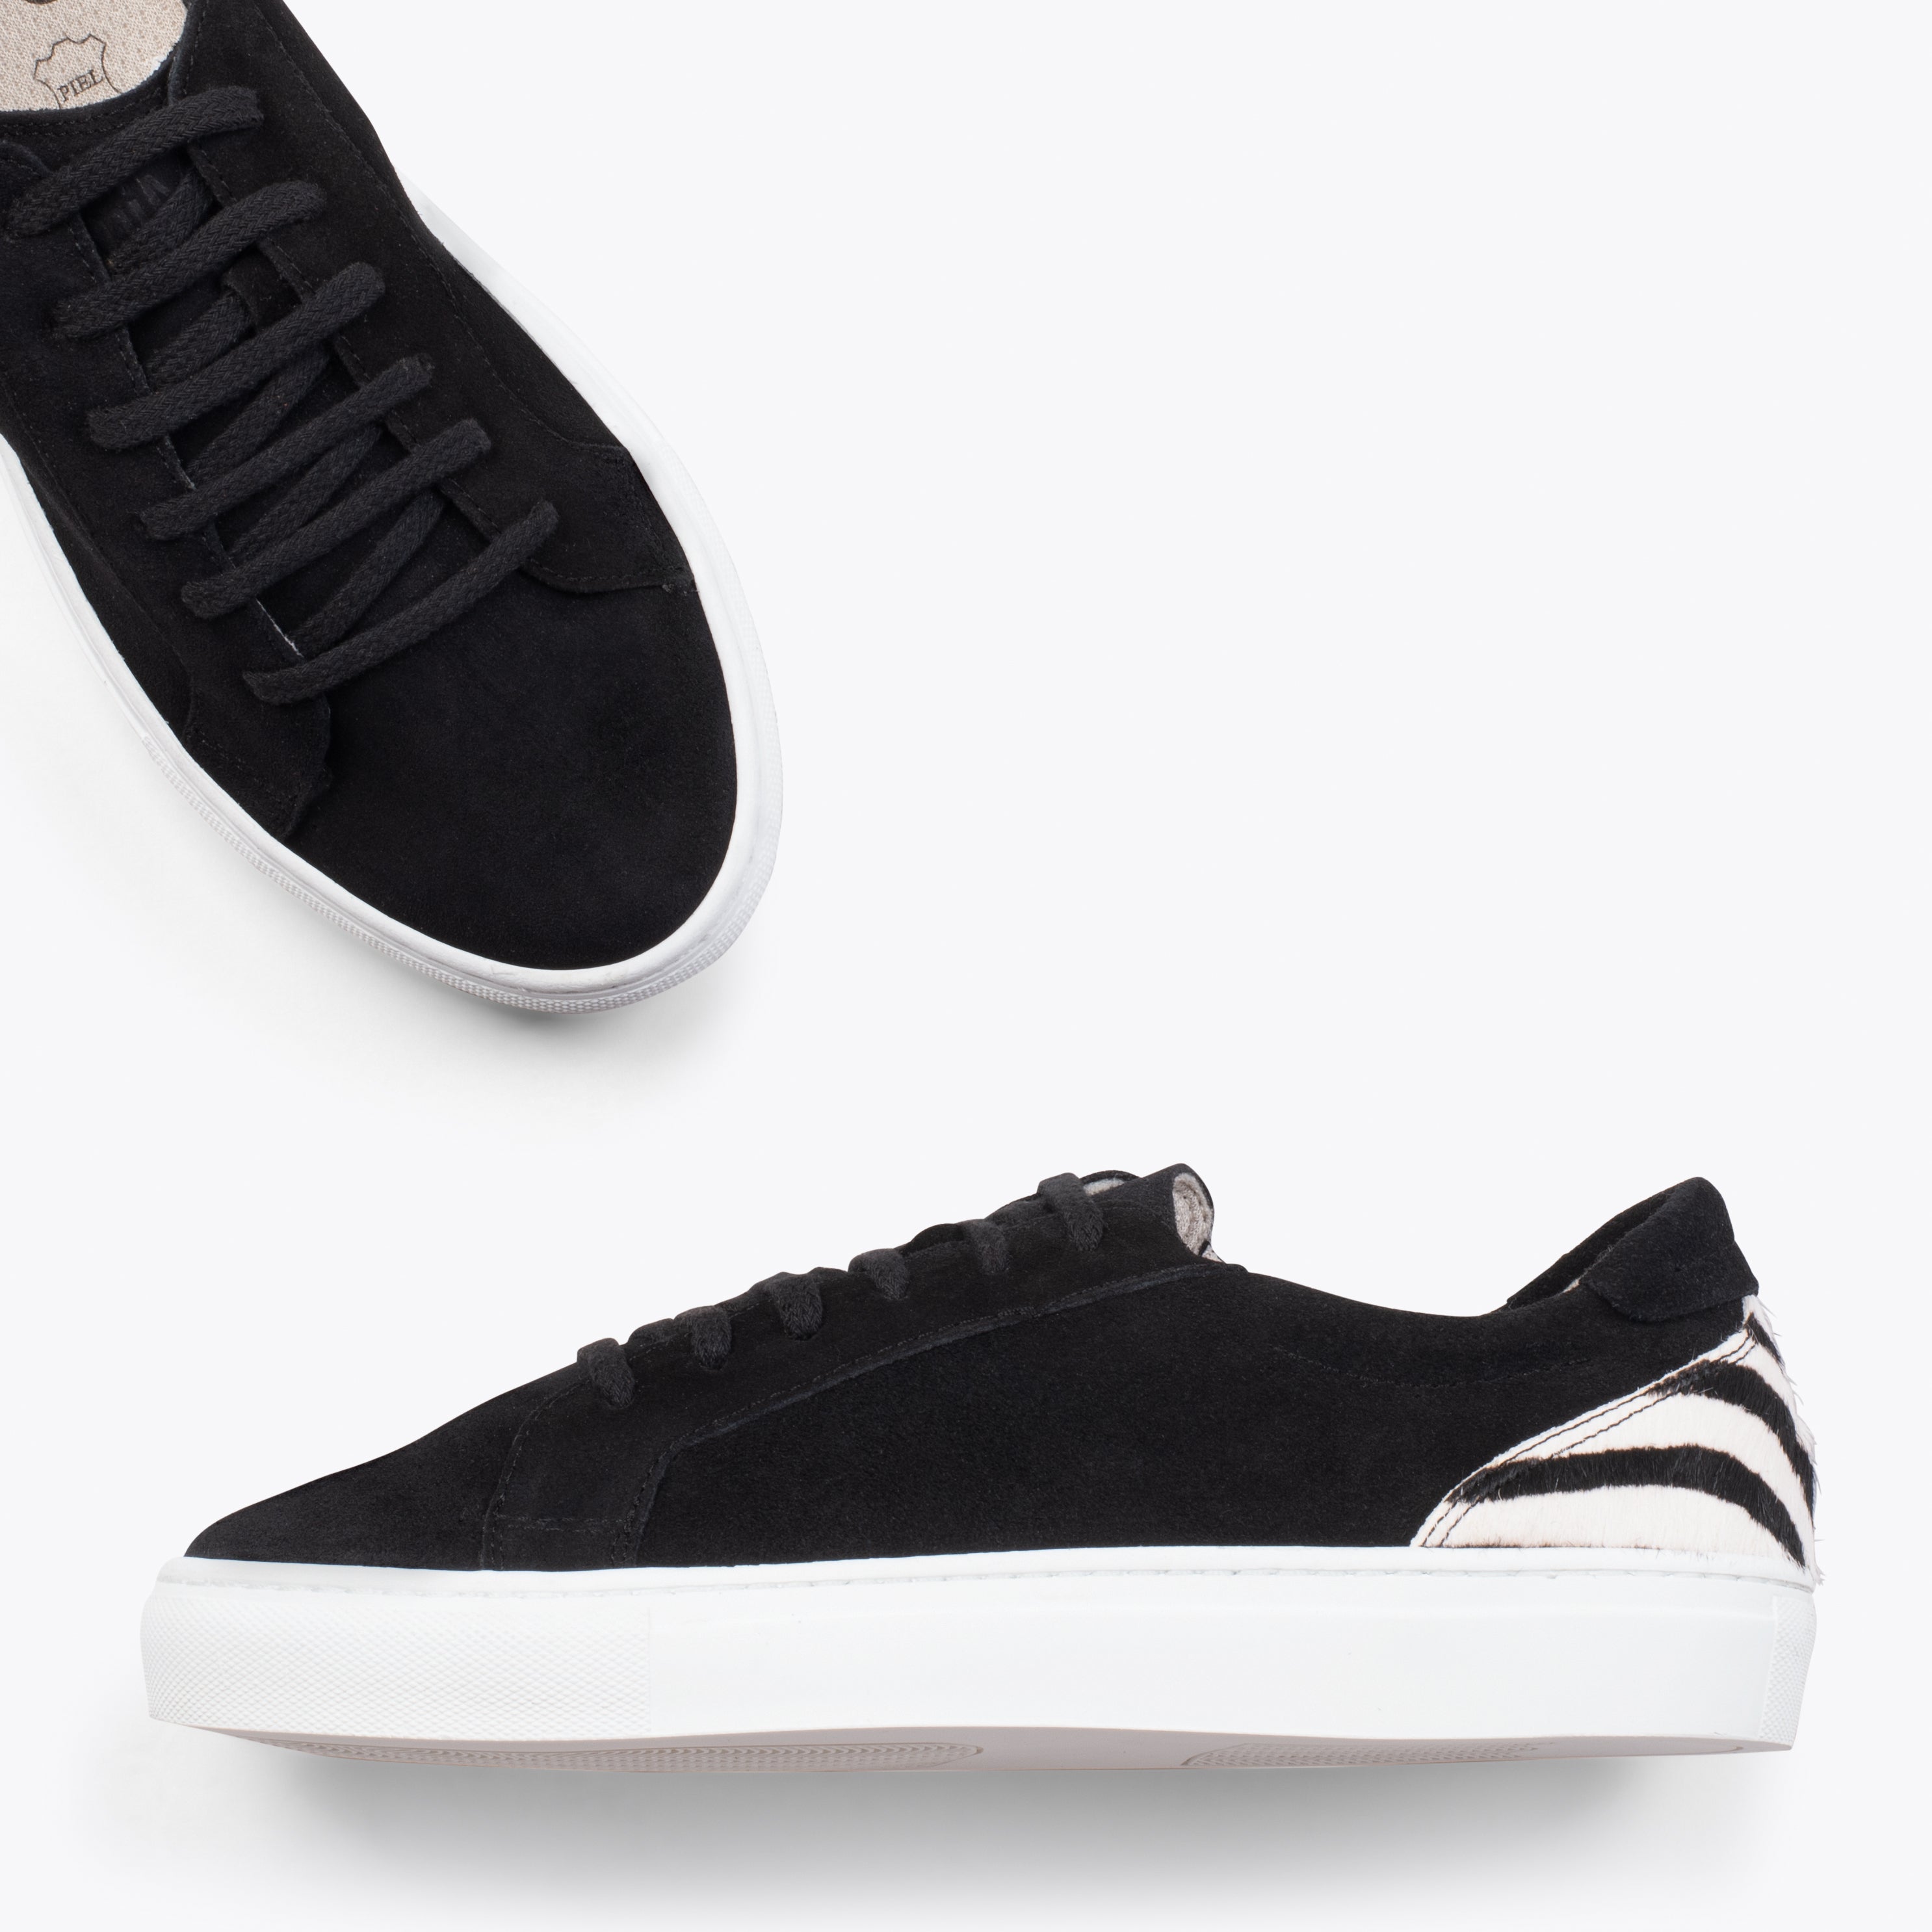 ENJOY – BLACK AND ZEBRA suede lifestyle sneakers